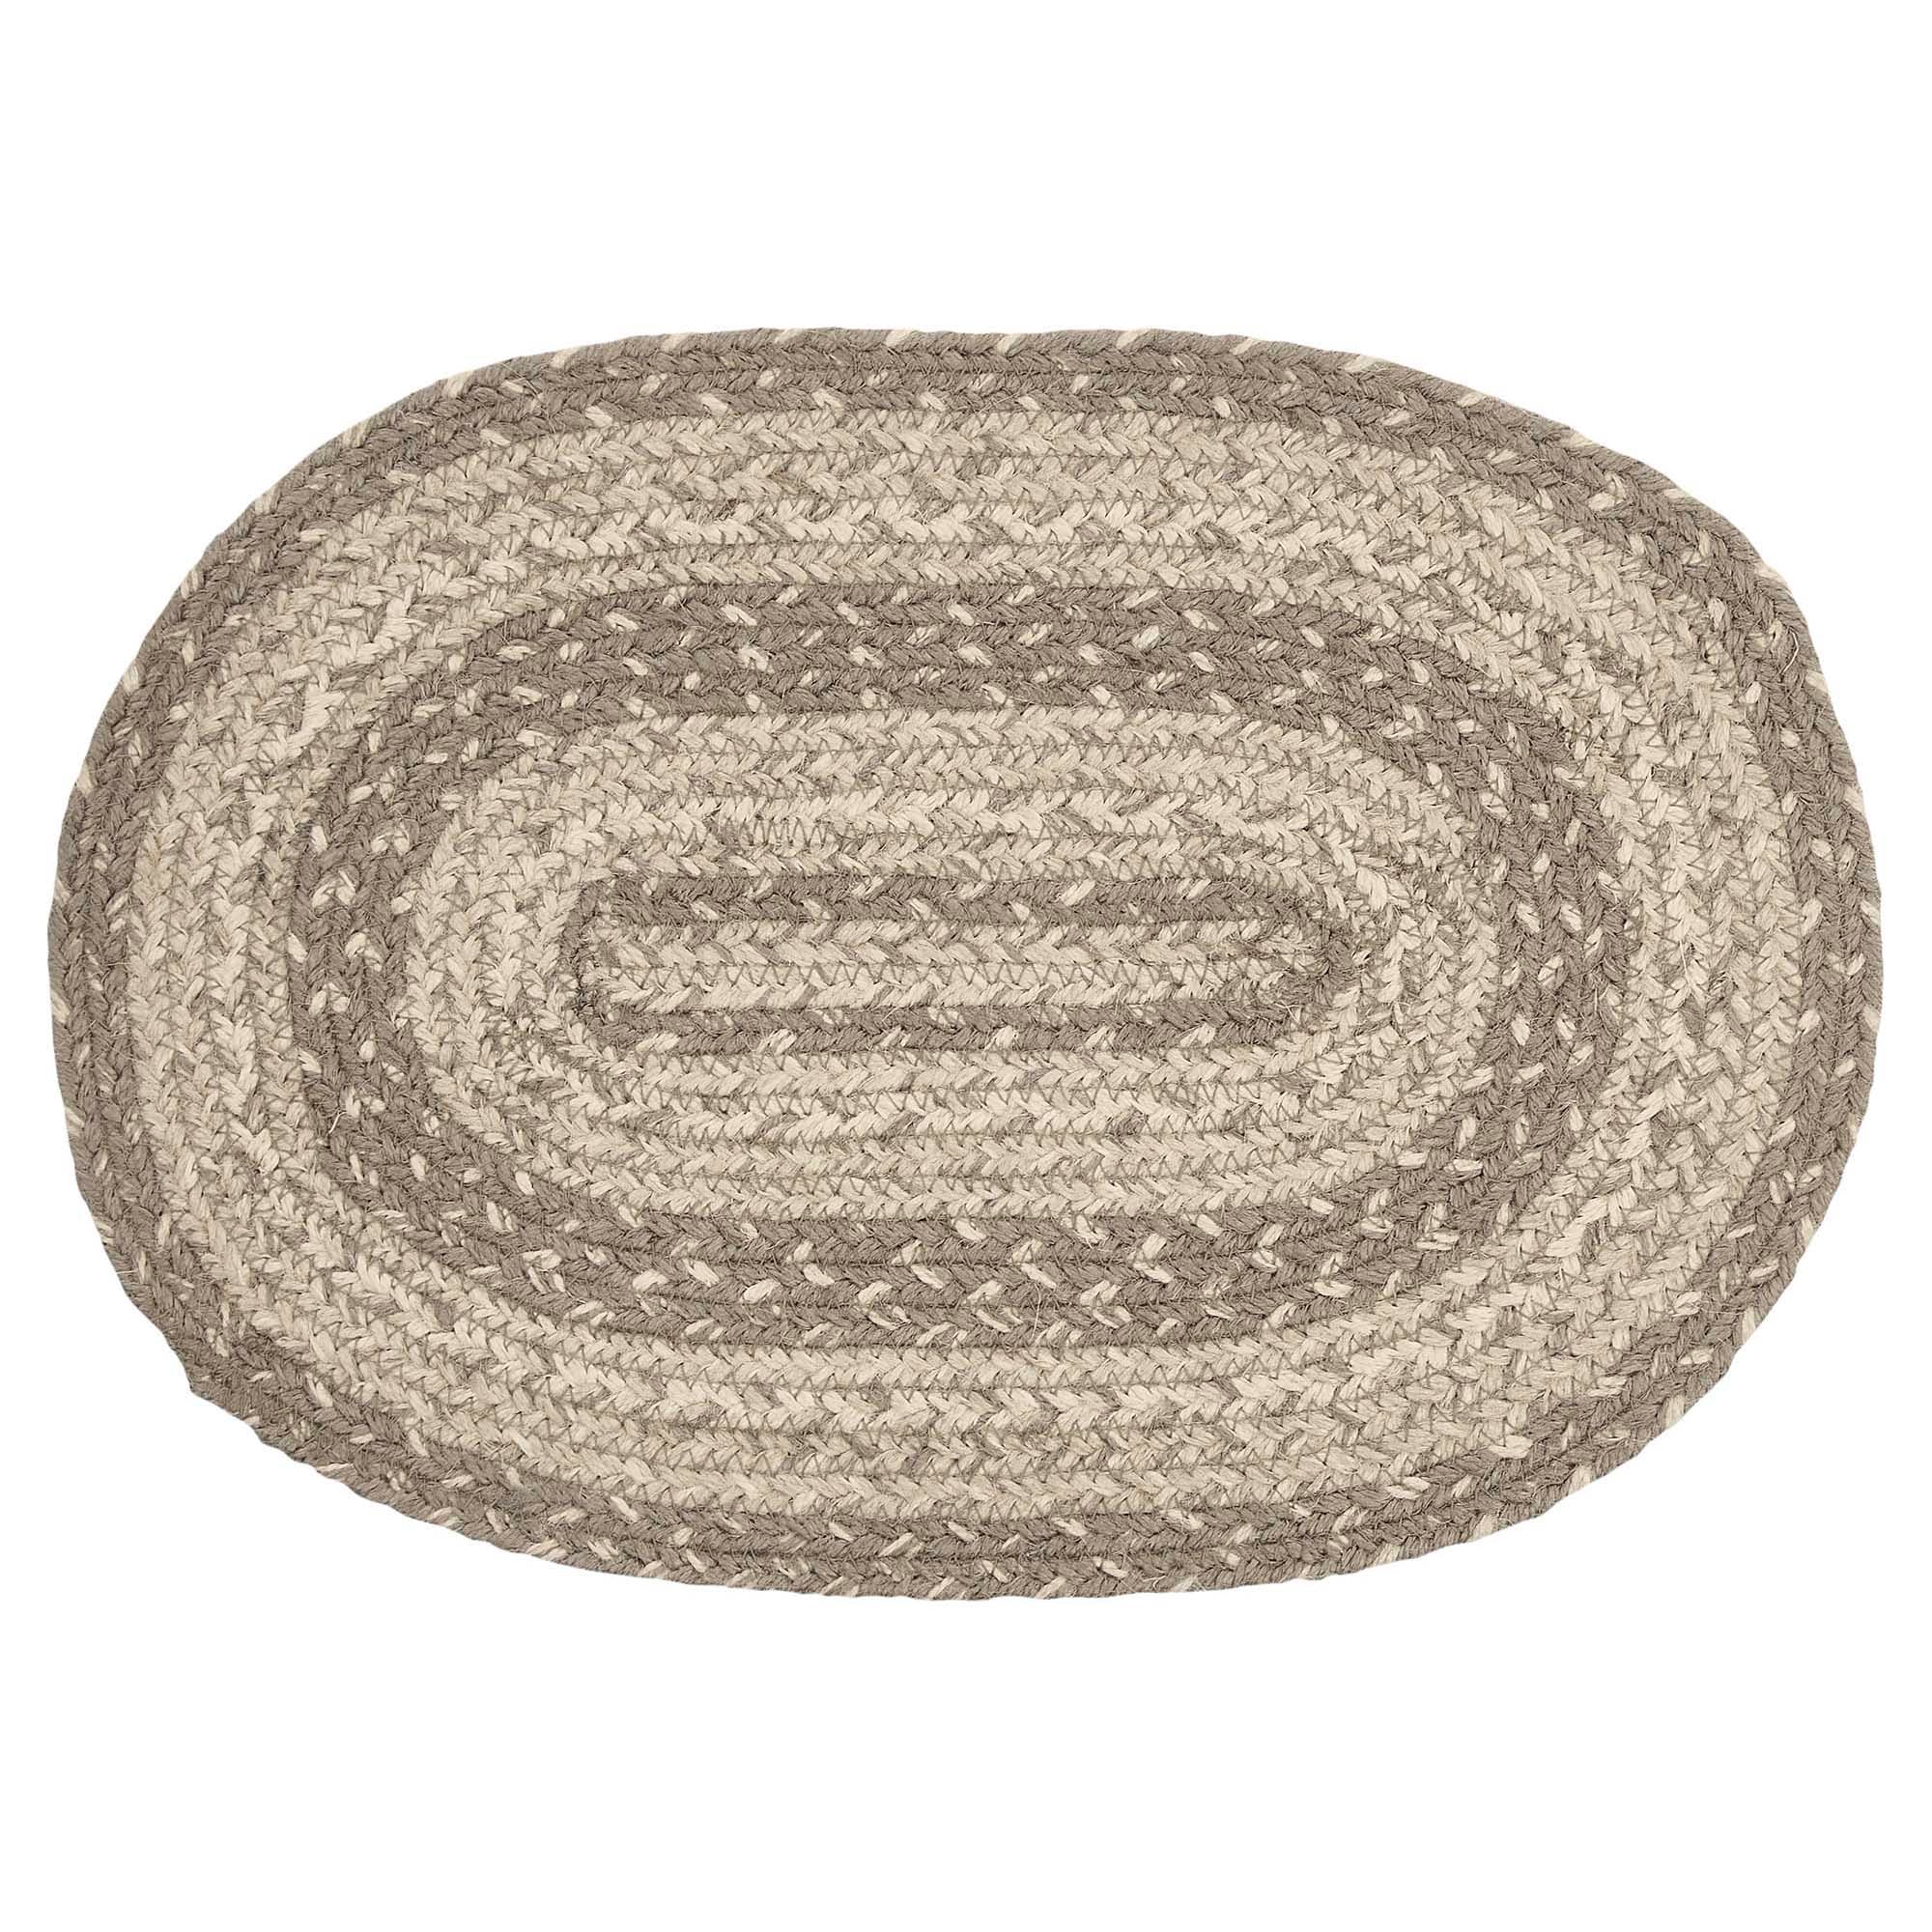 Cobblestone Jute Braided Oval Placemat 10x15 VHC Brands